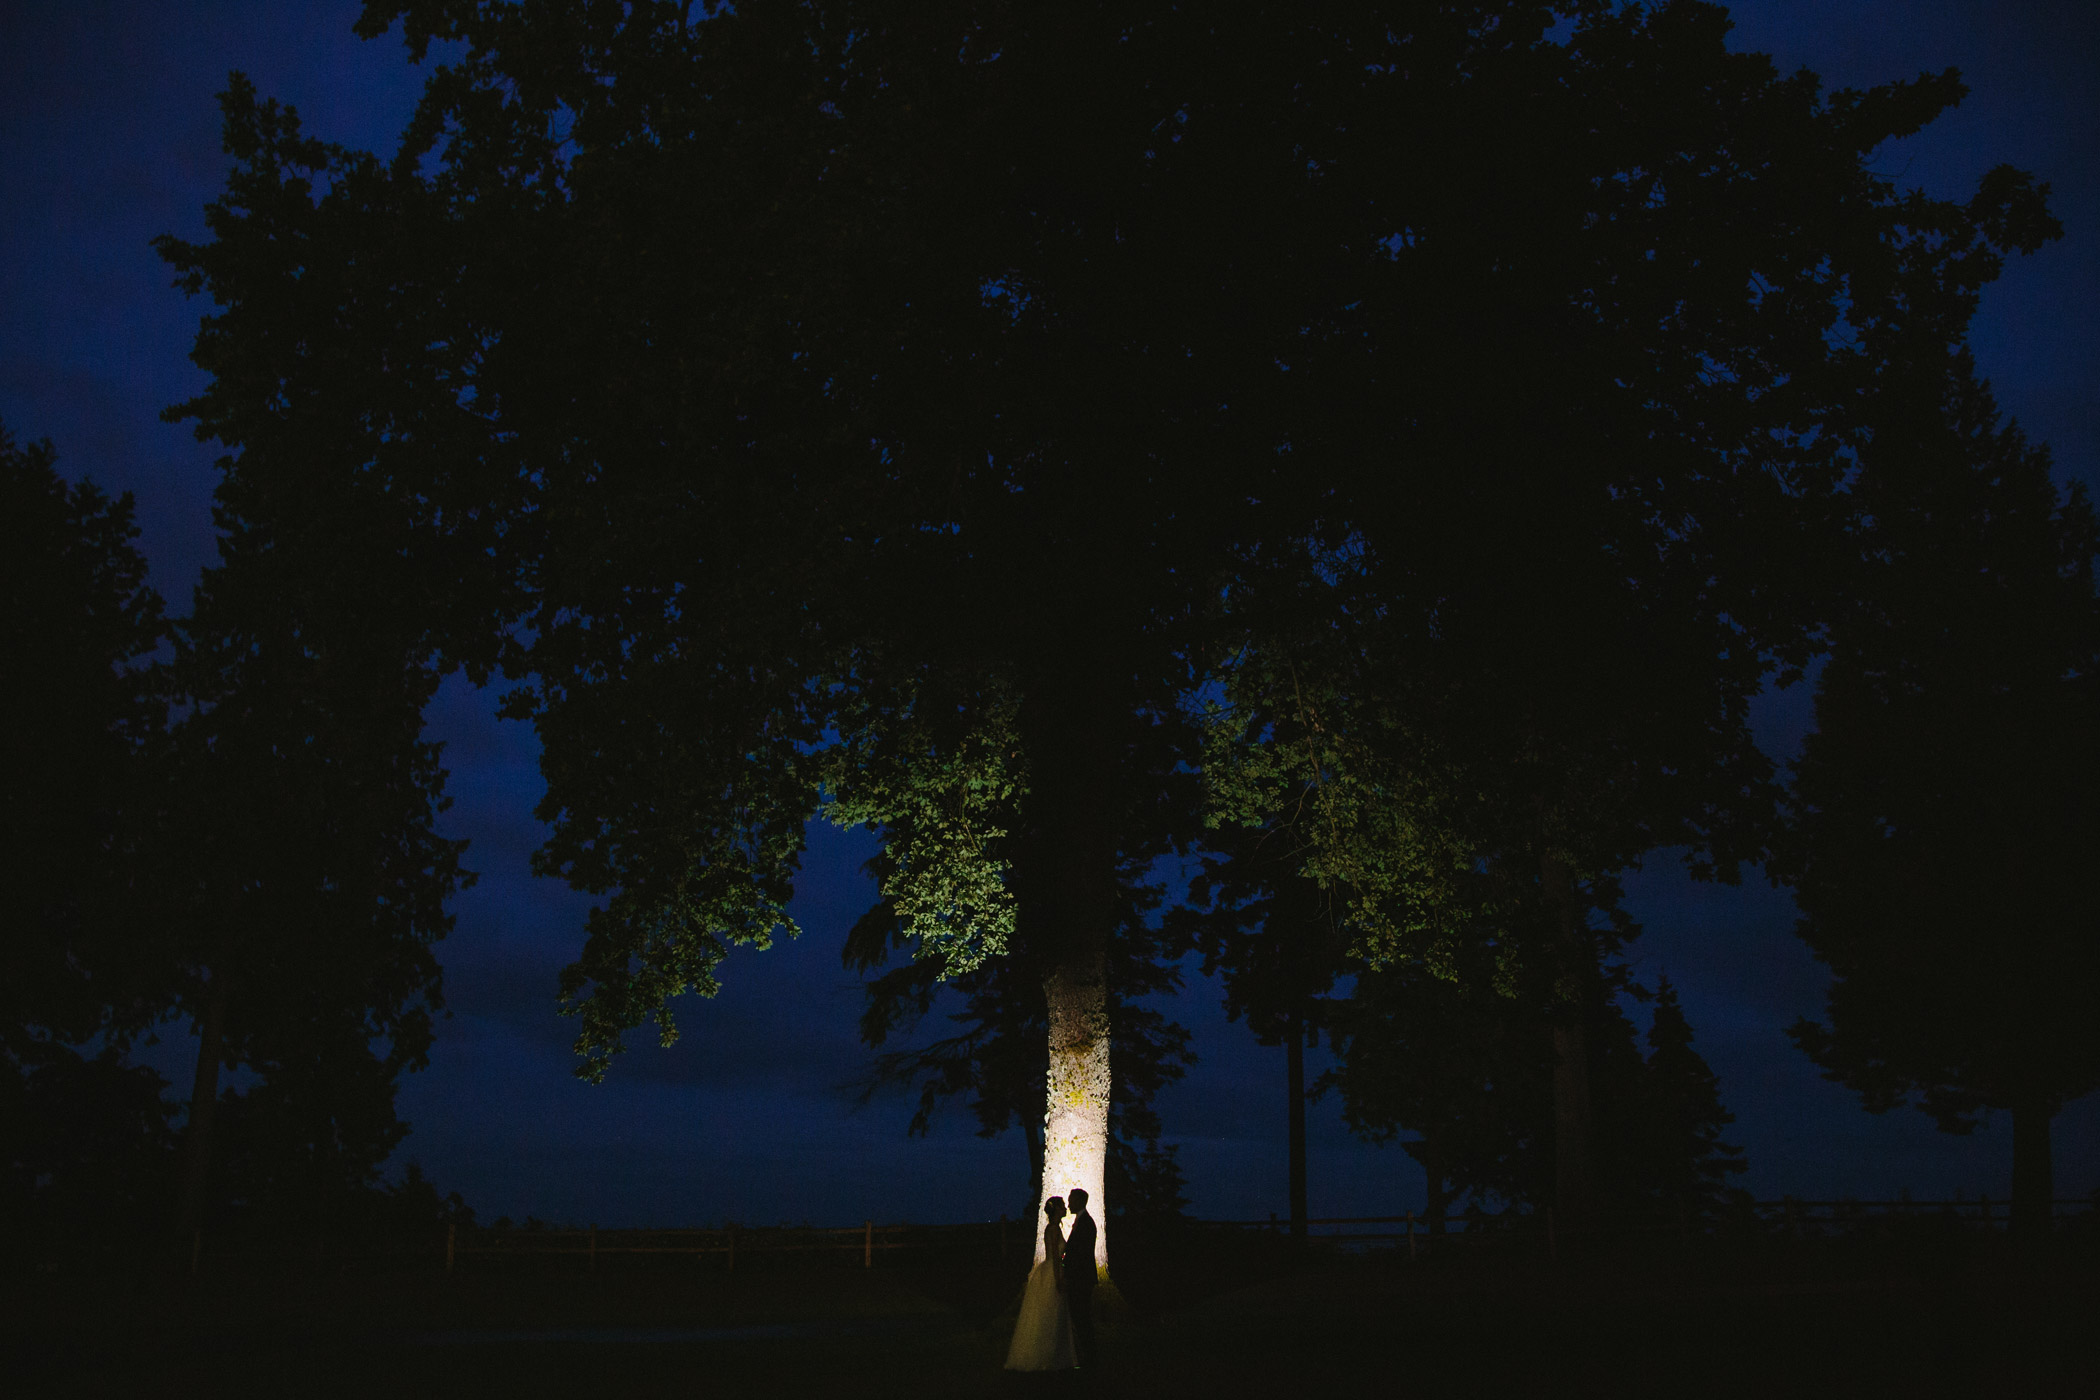 Night time silhouette portrait with tree